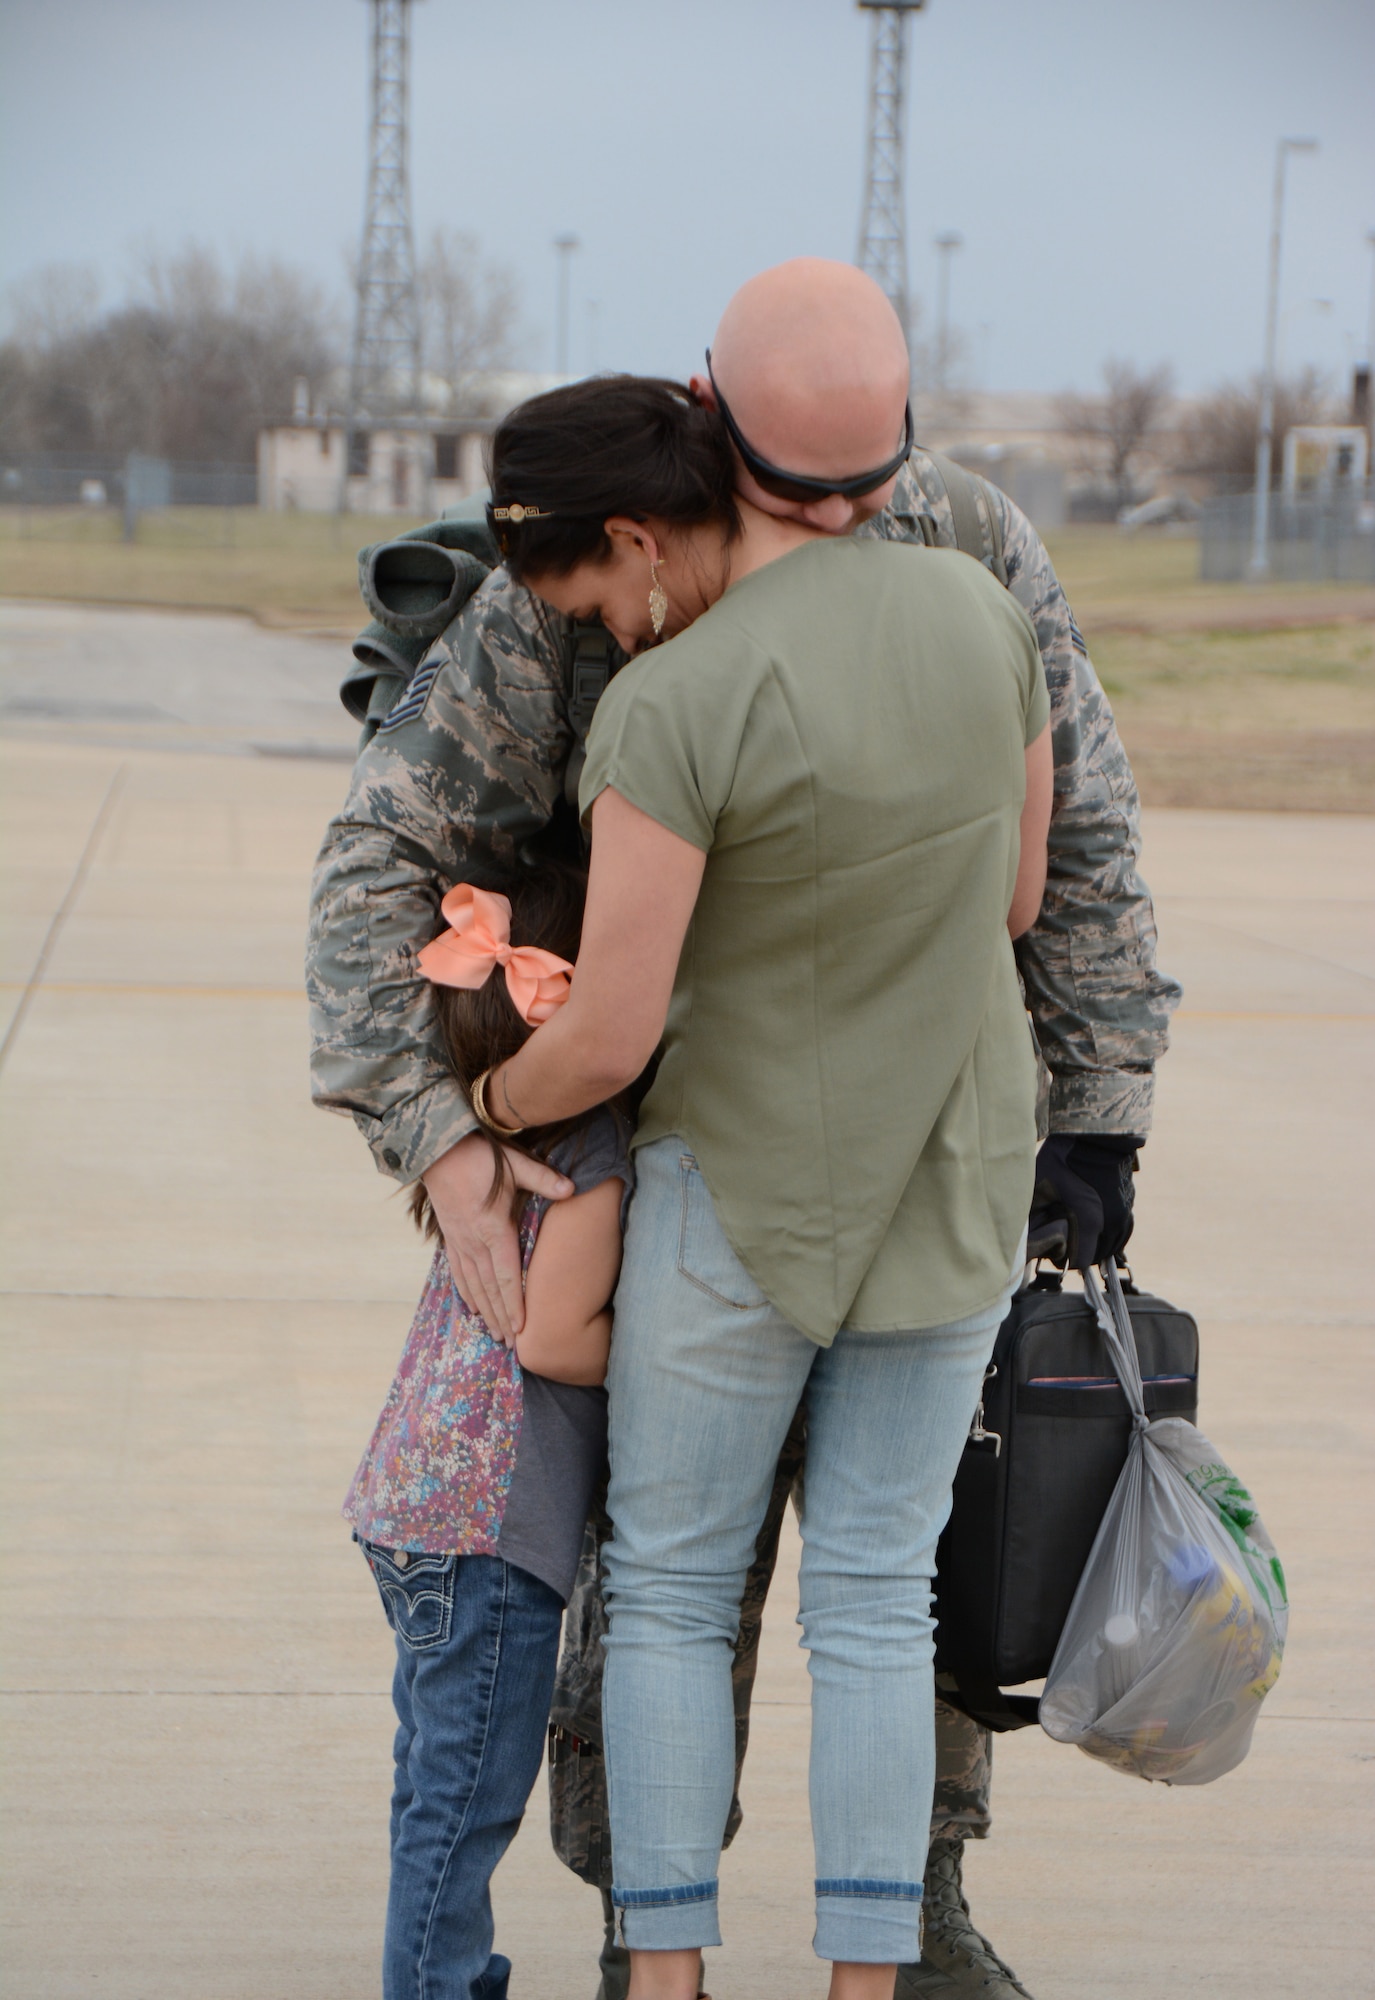 Staff Sgt. Shannon Hielscher of the 507th Maintenance Squadron hugs his wife and daughter following a deployment Feb. 19, 2017, at Tinker Air Force Base, Okla. More than 90 Reservists deployed in December 2016 in support of air operations at Incirlik Air Base, Turkey, against the Islamic State group. (U.S. Air Force photo/Tech. Sgt. Lauren Gleason)